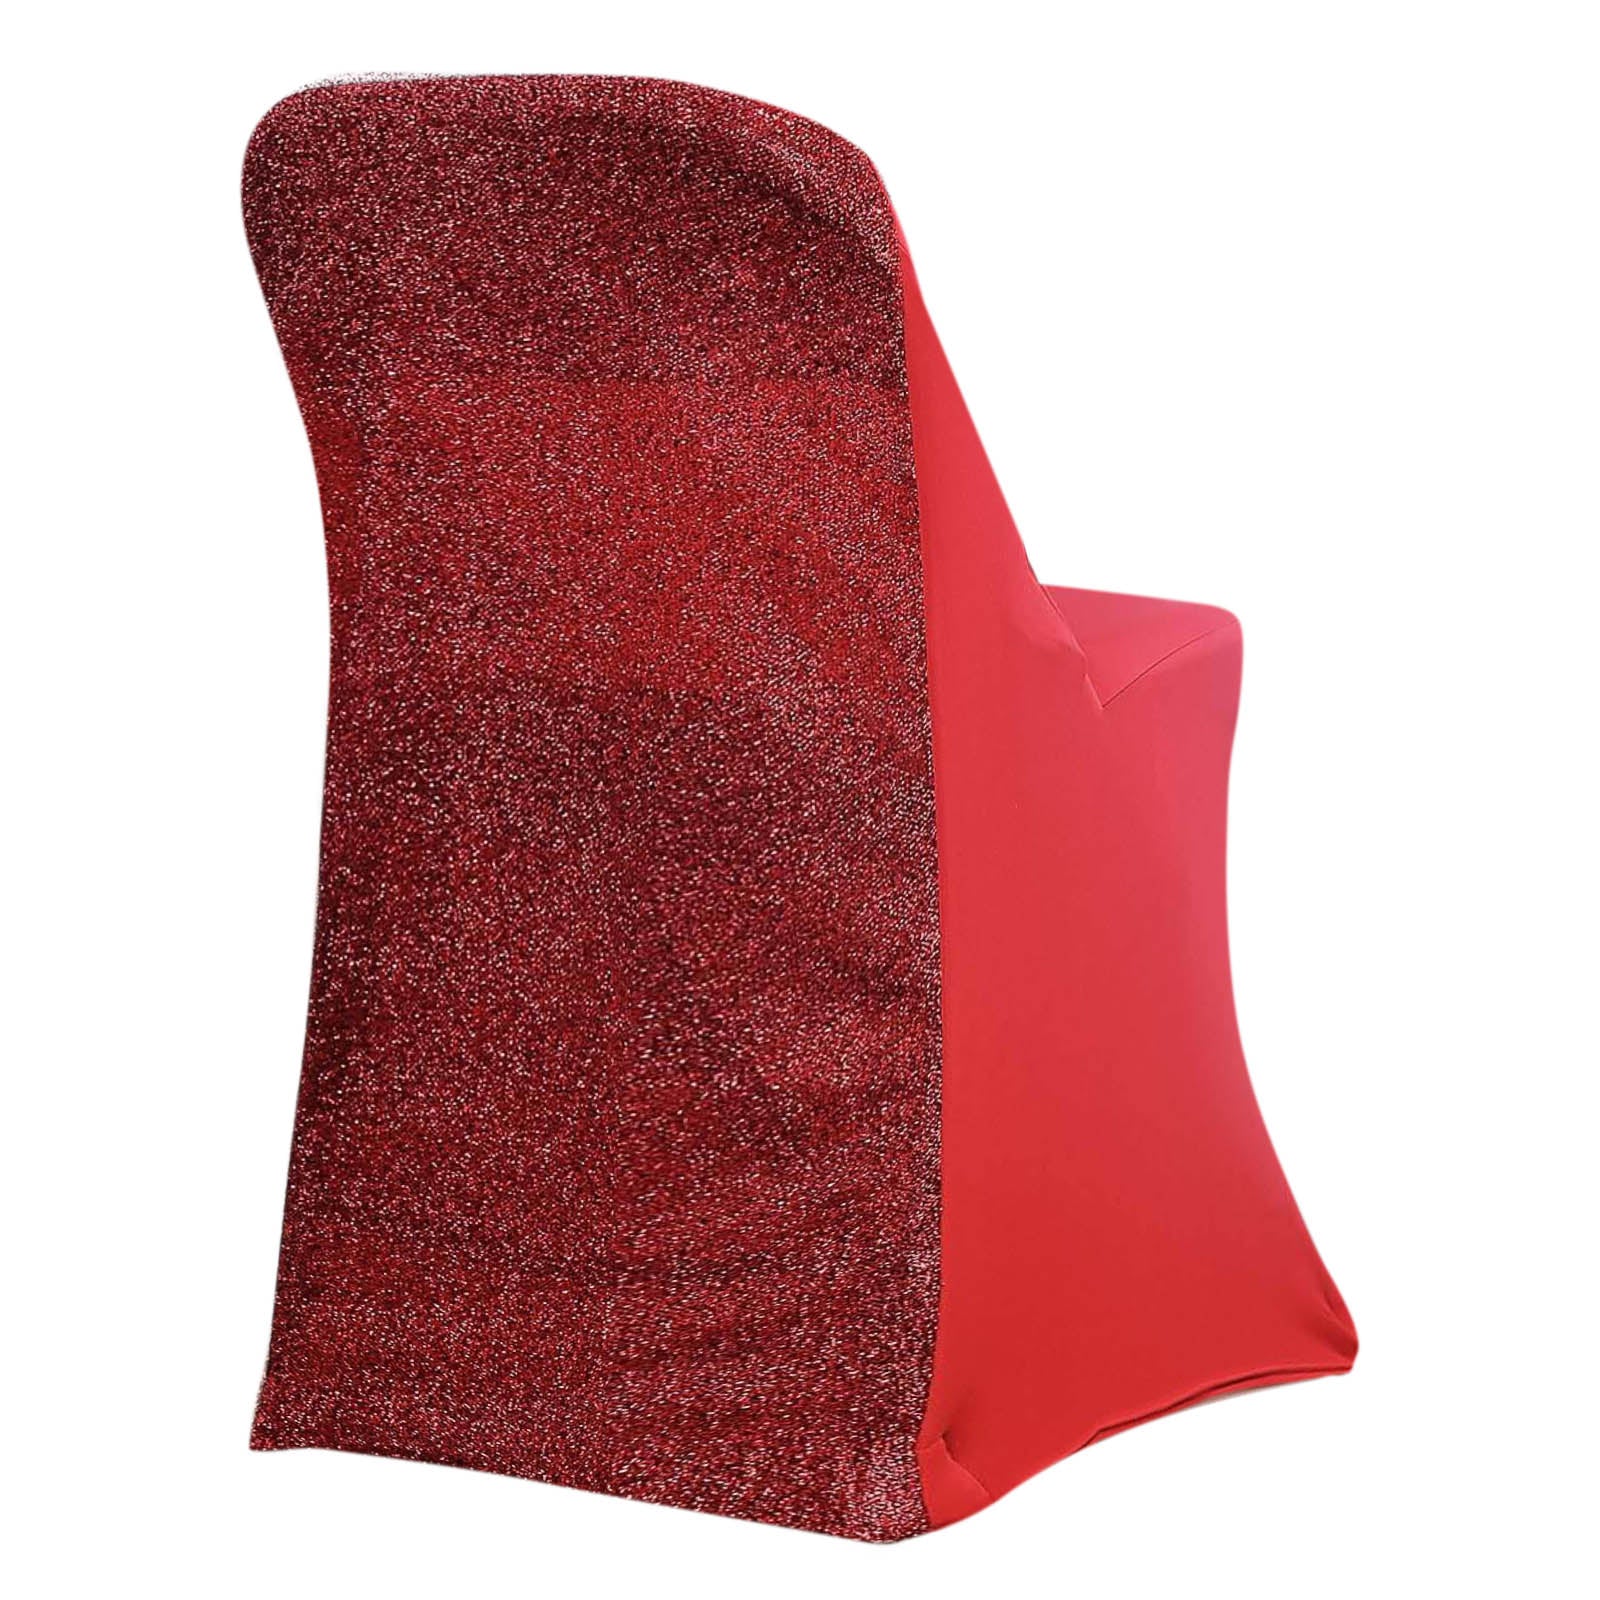 Red Lifetime Folding Spandex Chair Covers, Stretch Lycra Lifetime